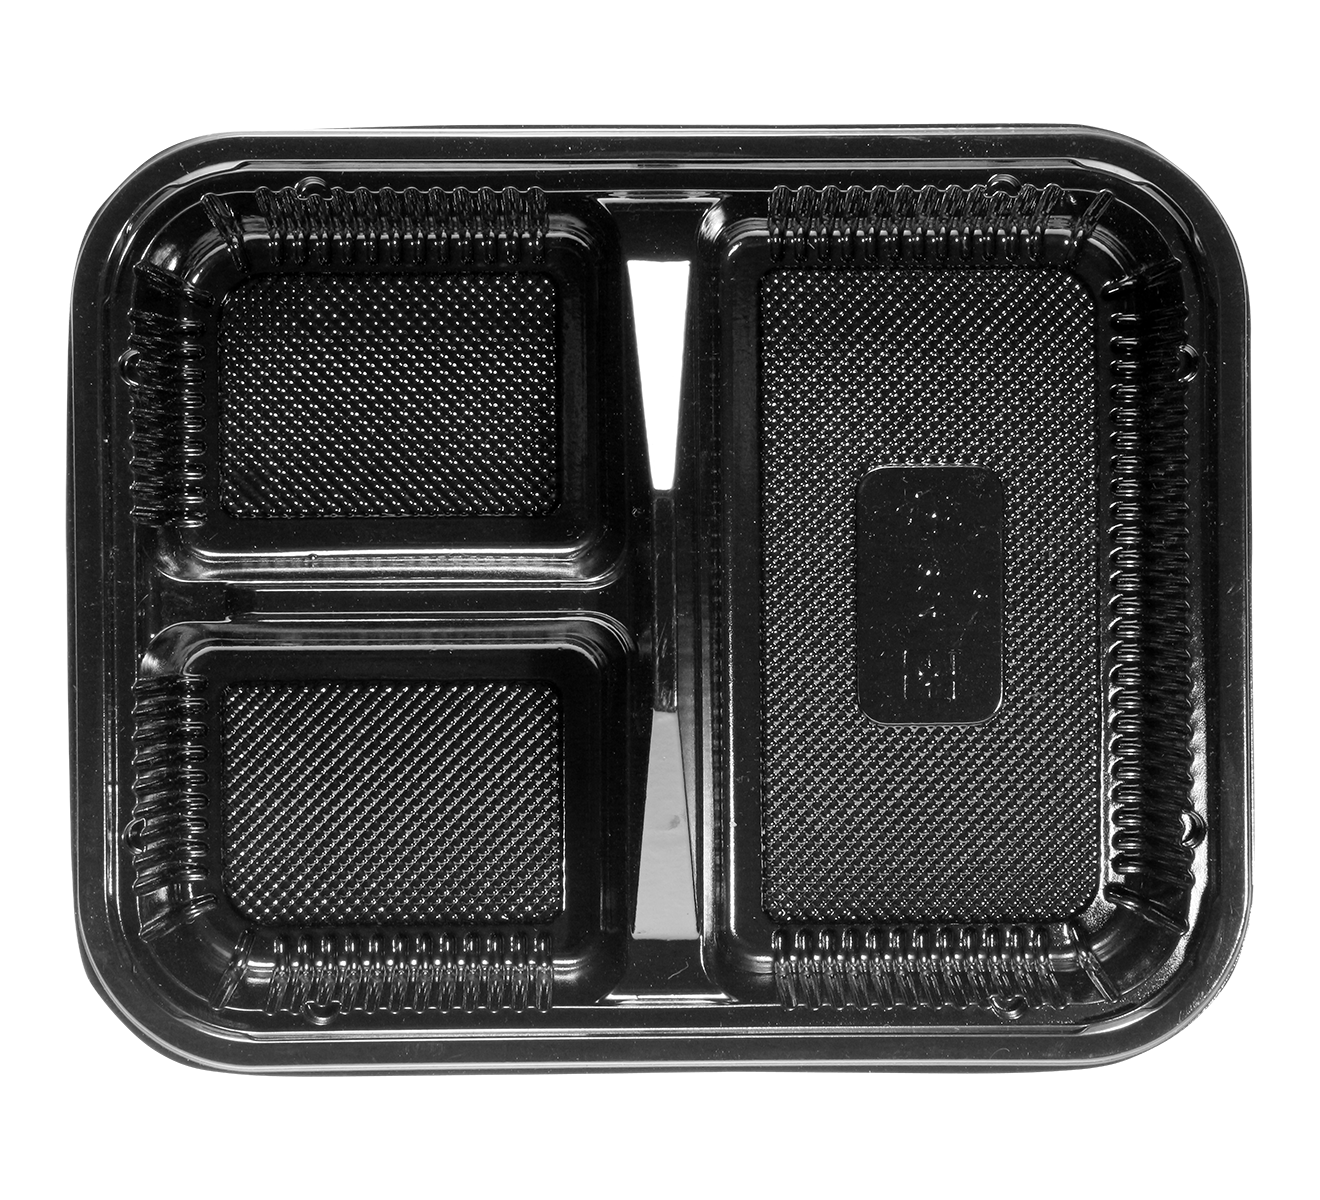 STI-304 3 Compartments PS Bento/Lunch Box Meal Prep Containers